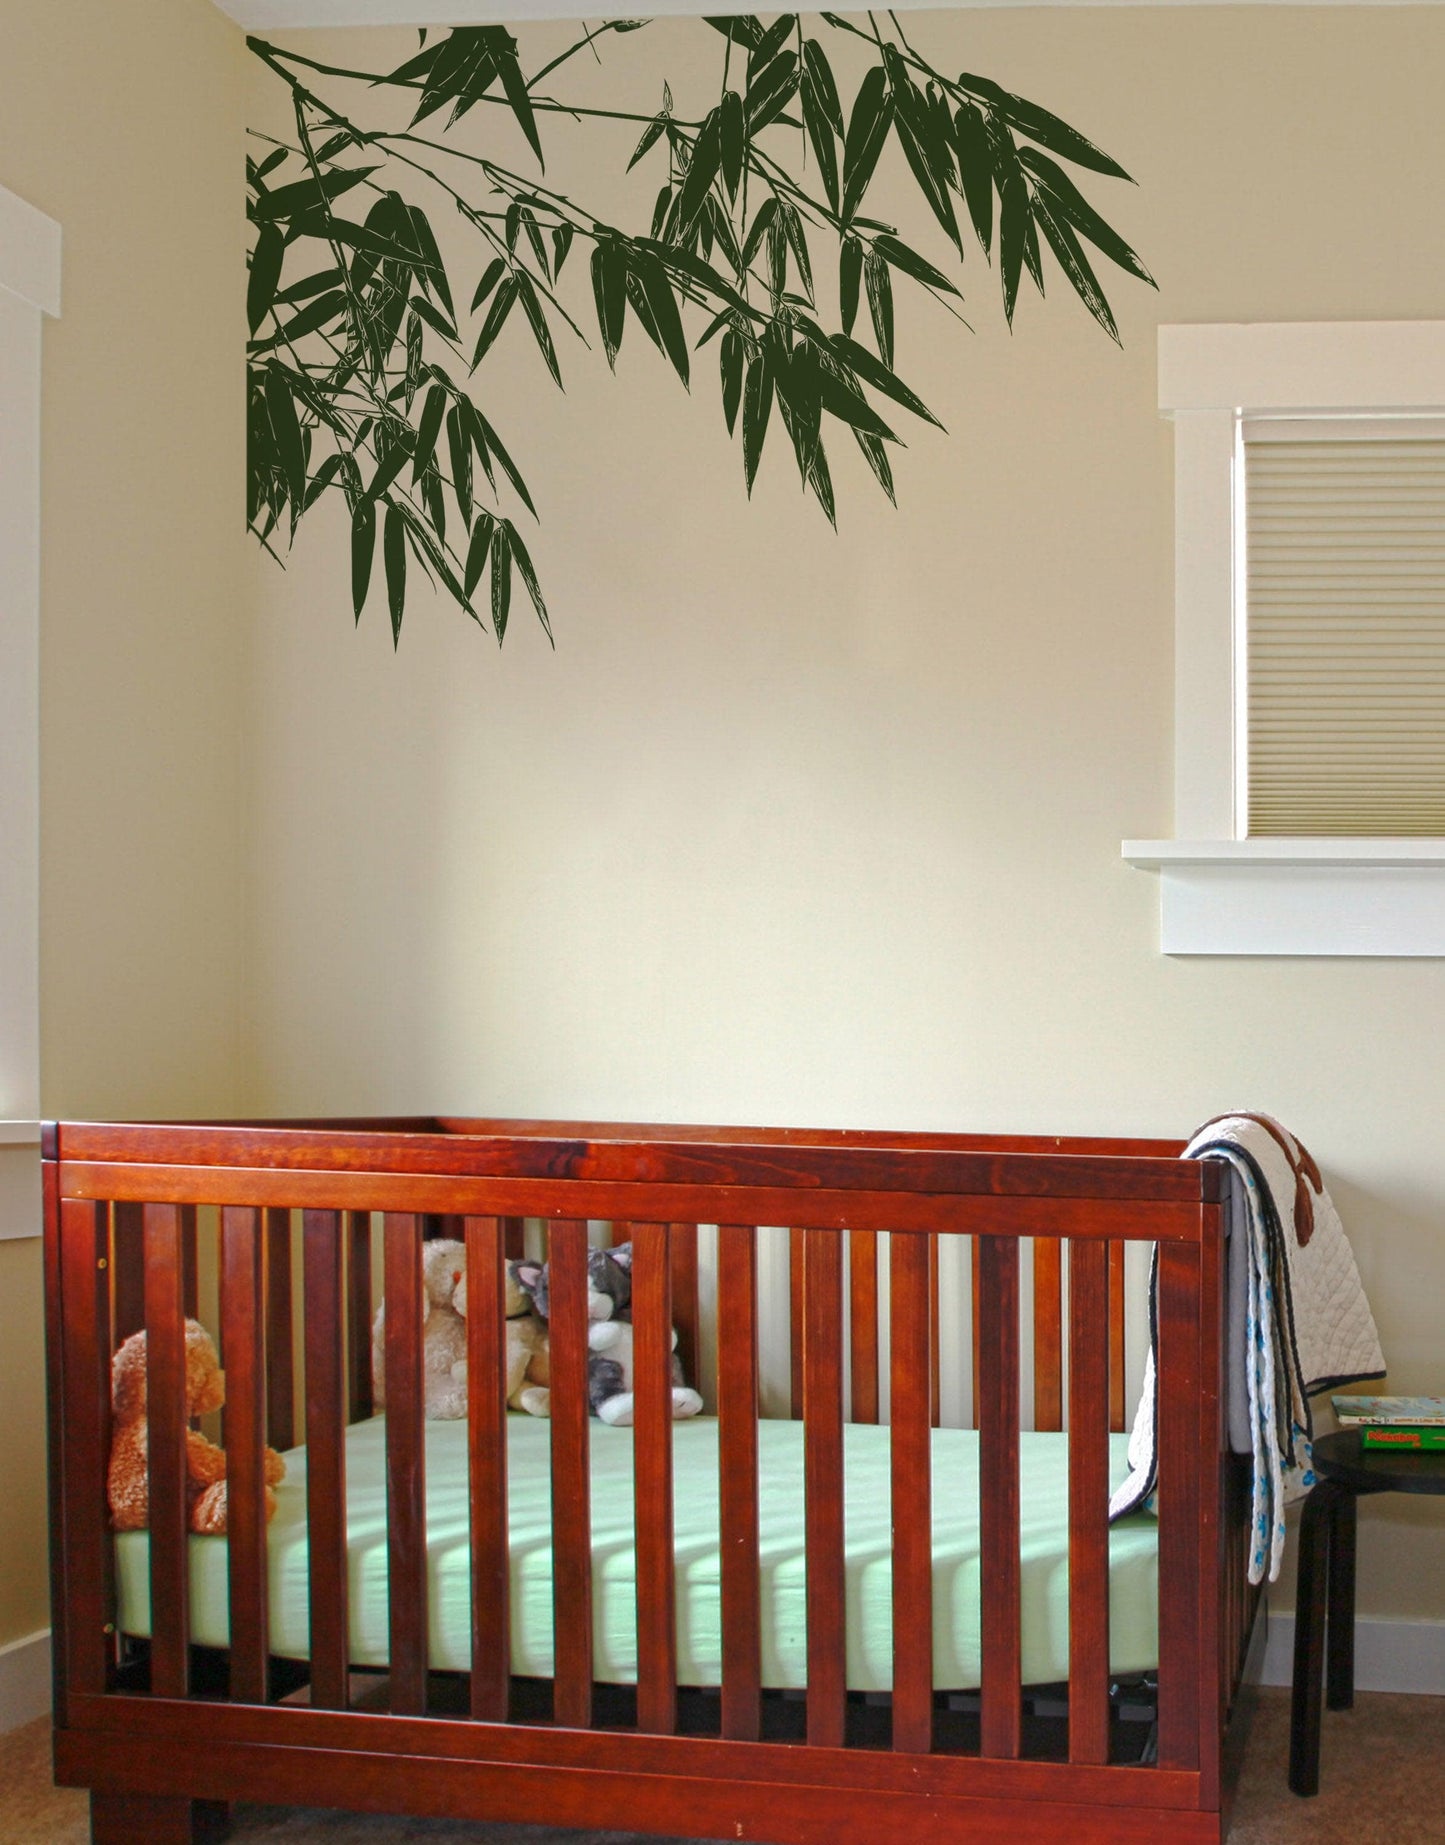 Chinese Bamboo Foliage Leaves Vinyl Wall Decal. #6313